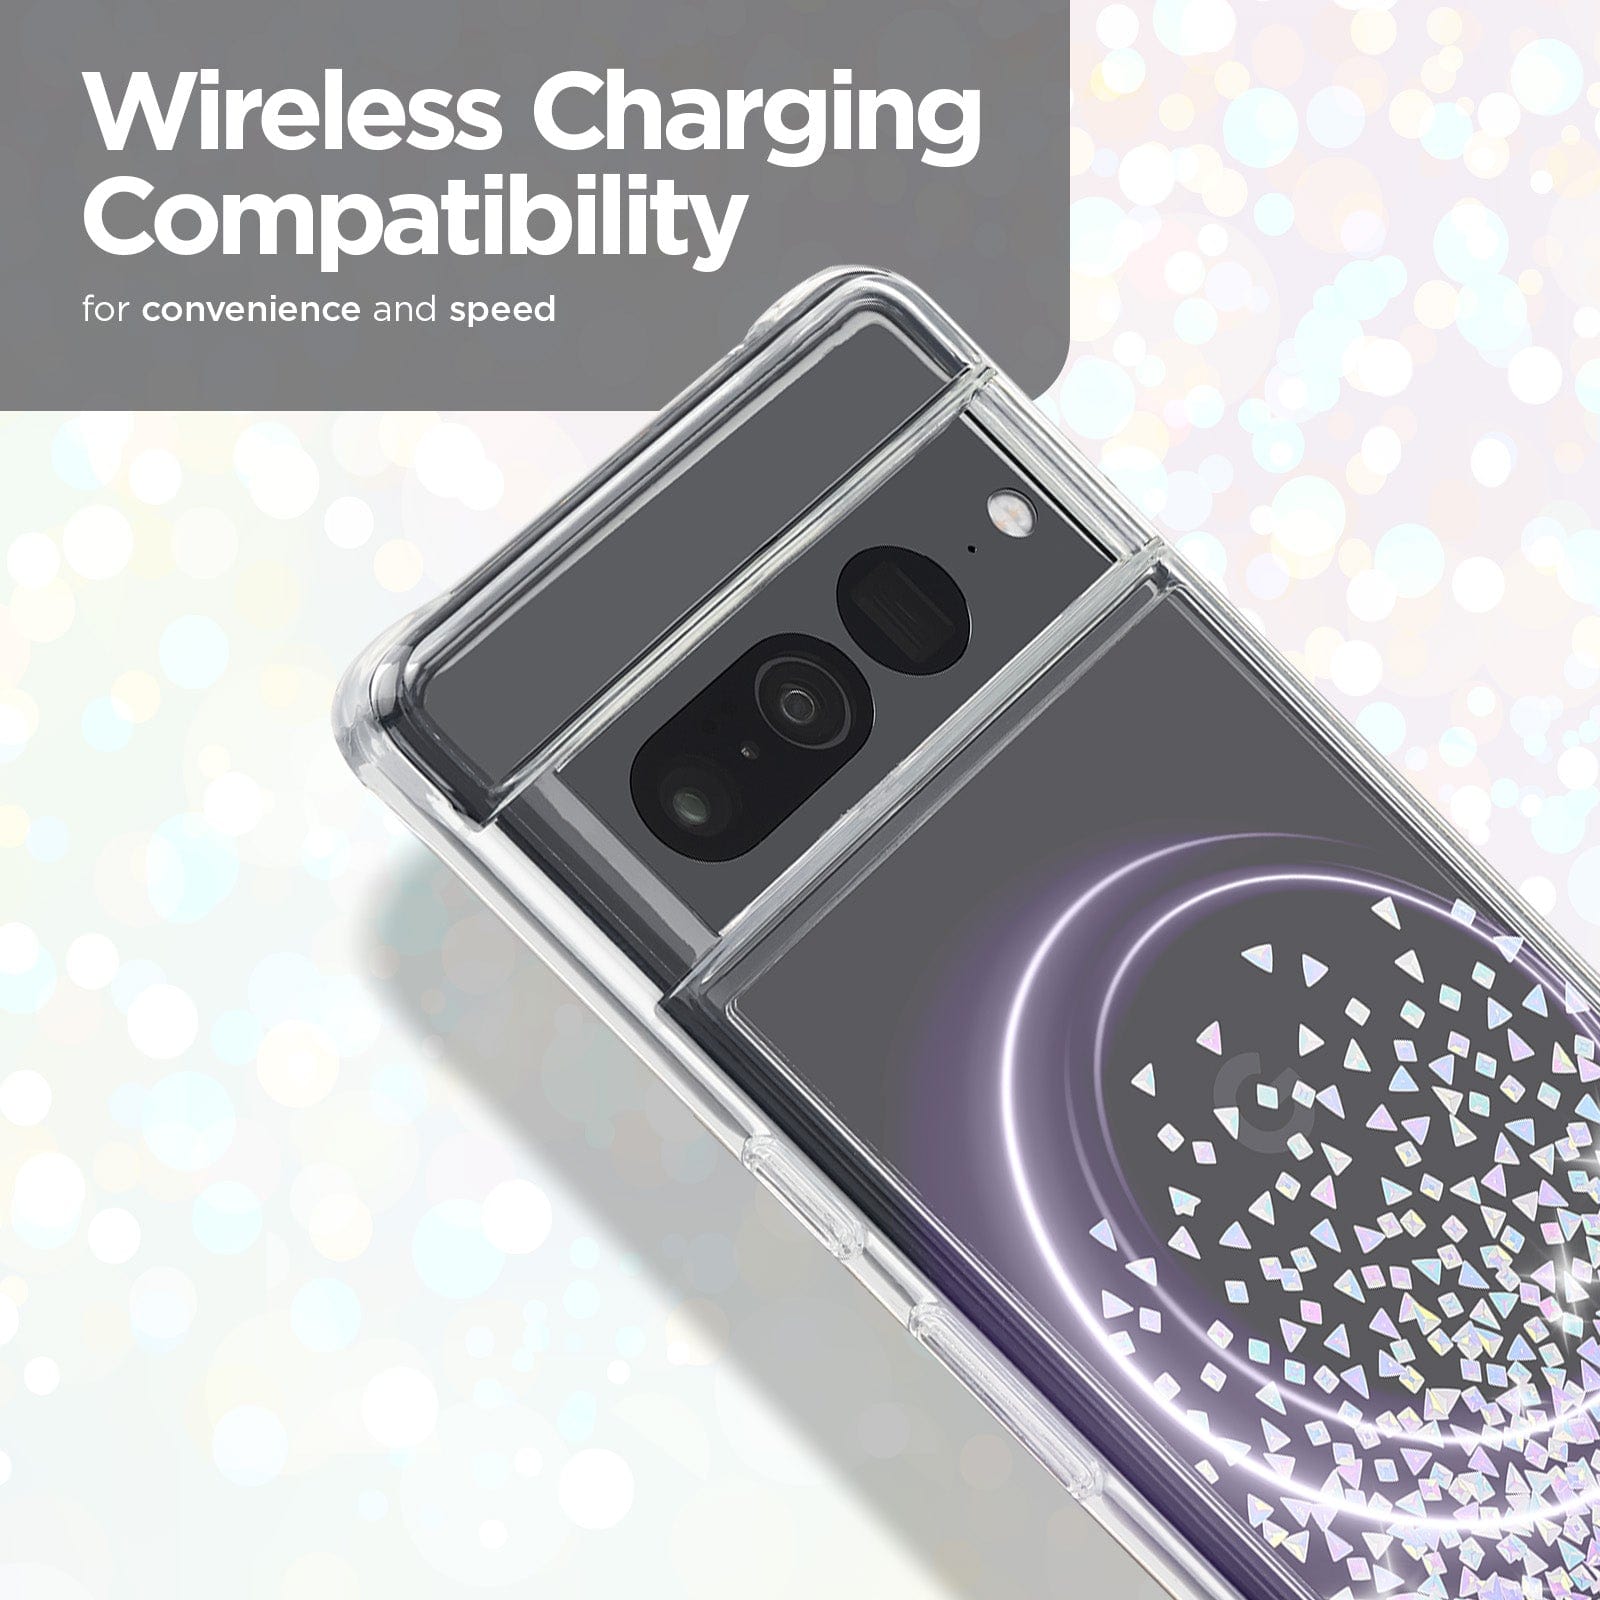 Wireless charging compatibility for convenience and speed